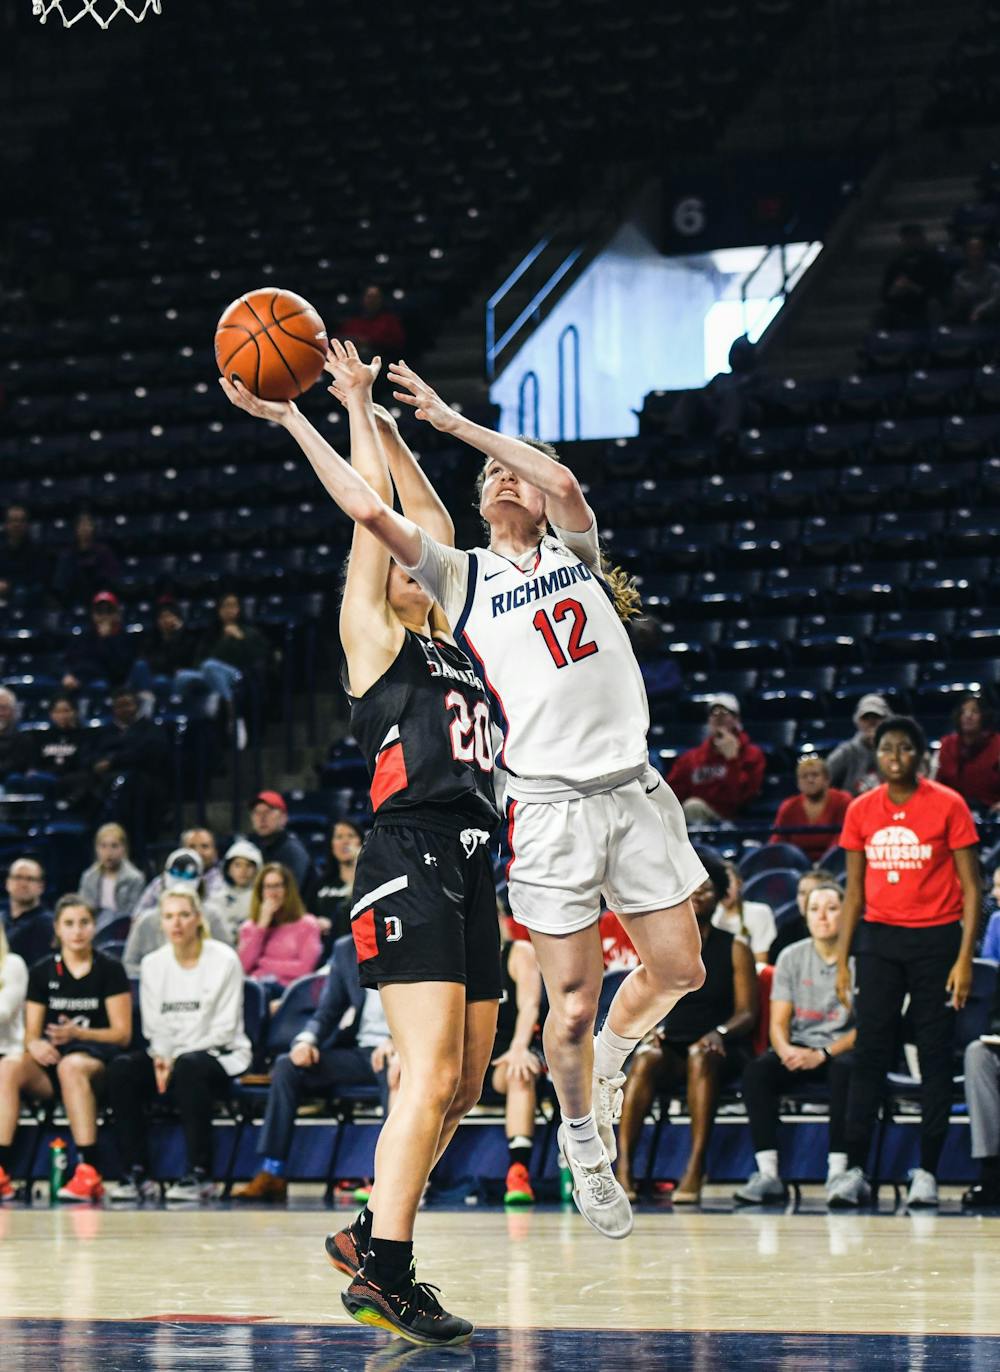 <p>Sophomore guard Claire Holt makes a shot past Davidson defense during a game at the Robins Center on Sunday, Jan. 26, 2020.</p>